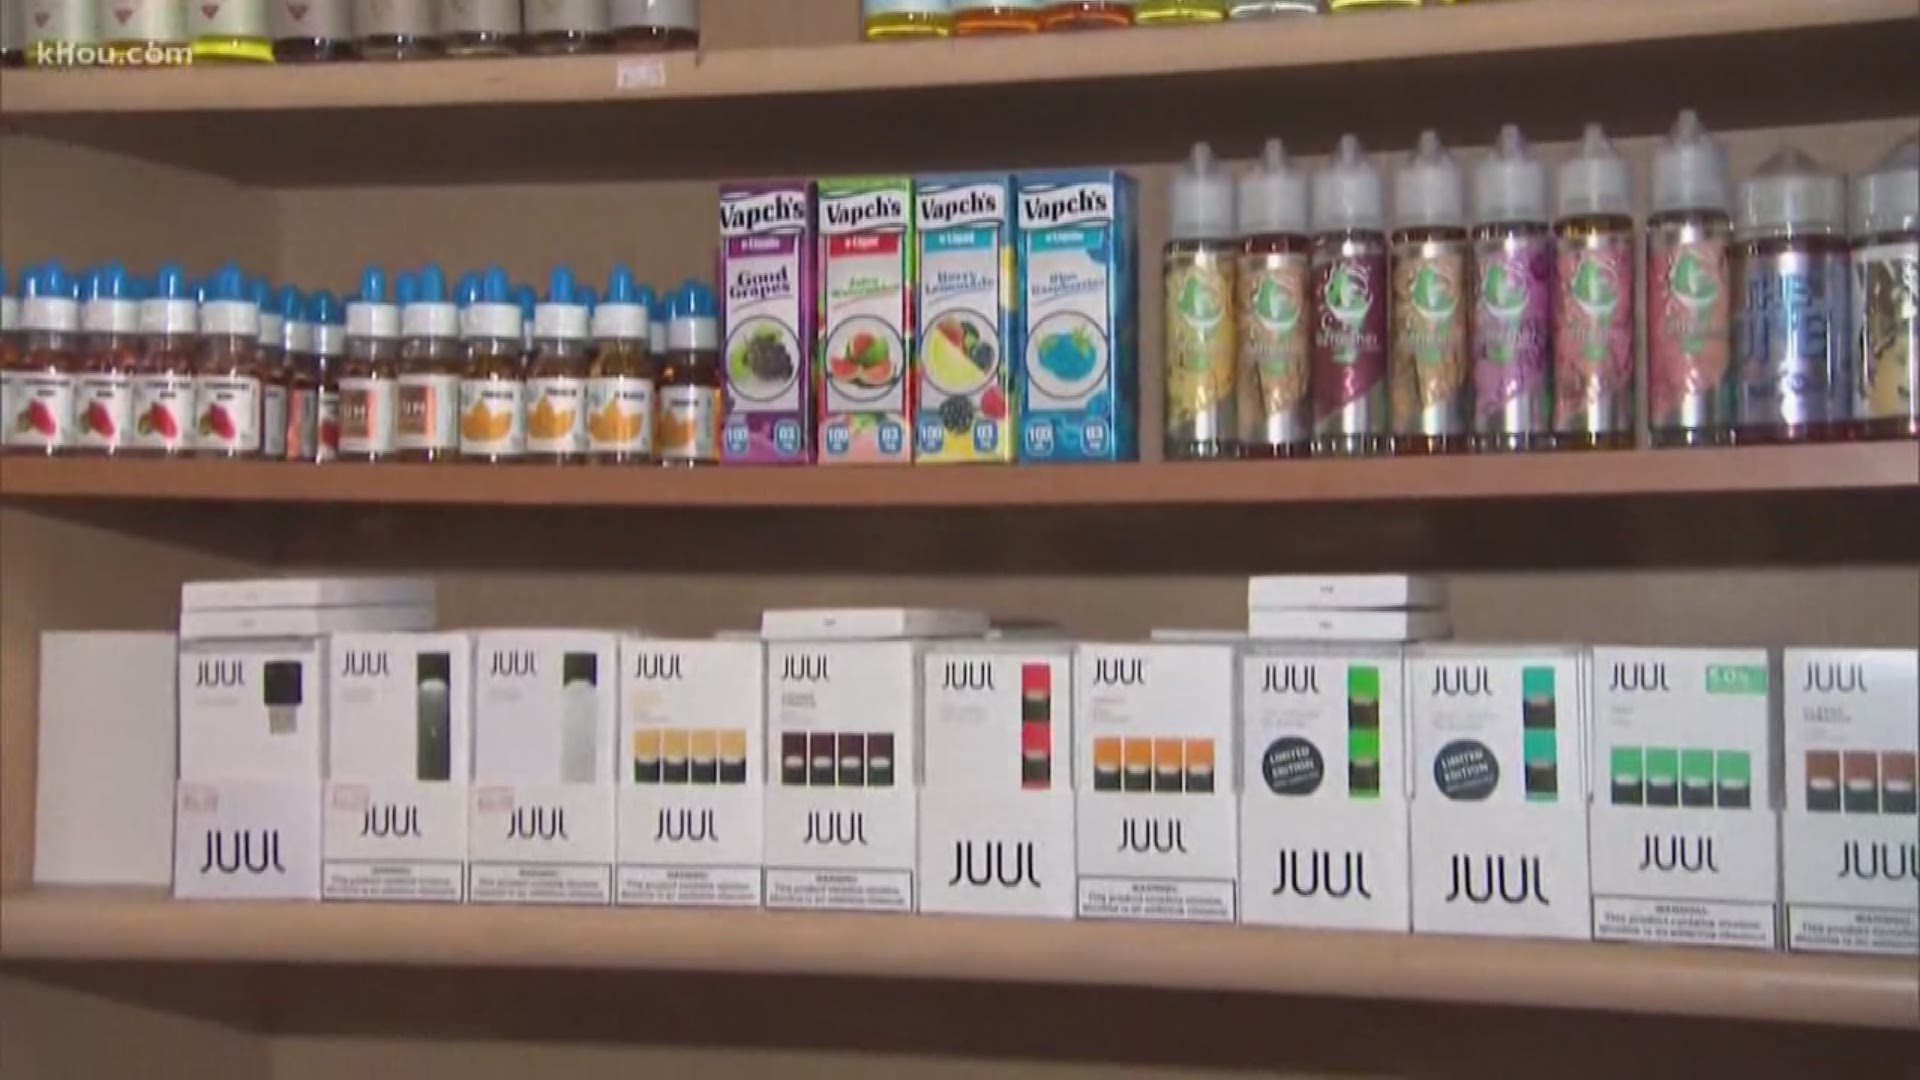 Vaping is all the rage with teens, but is it better than regular cigarettes? KHOU 11 Reporter Shern-Min Chow shares a health lesson she received from a Memorial Hermann pulmonologist.